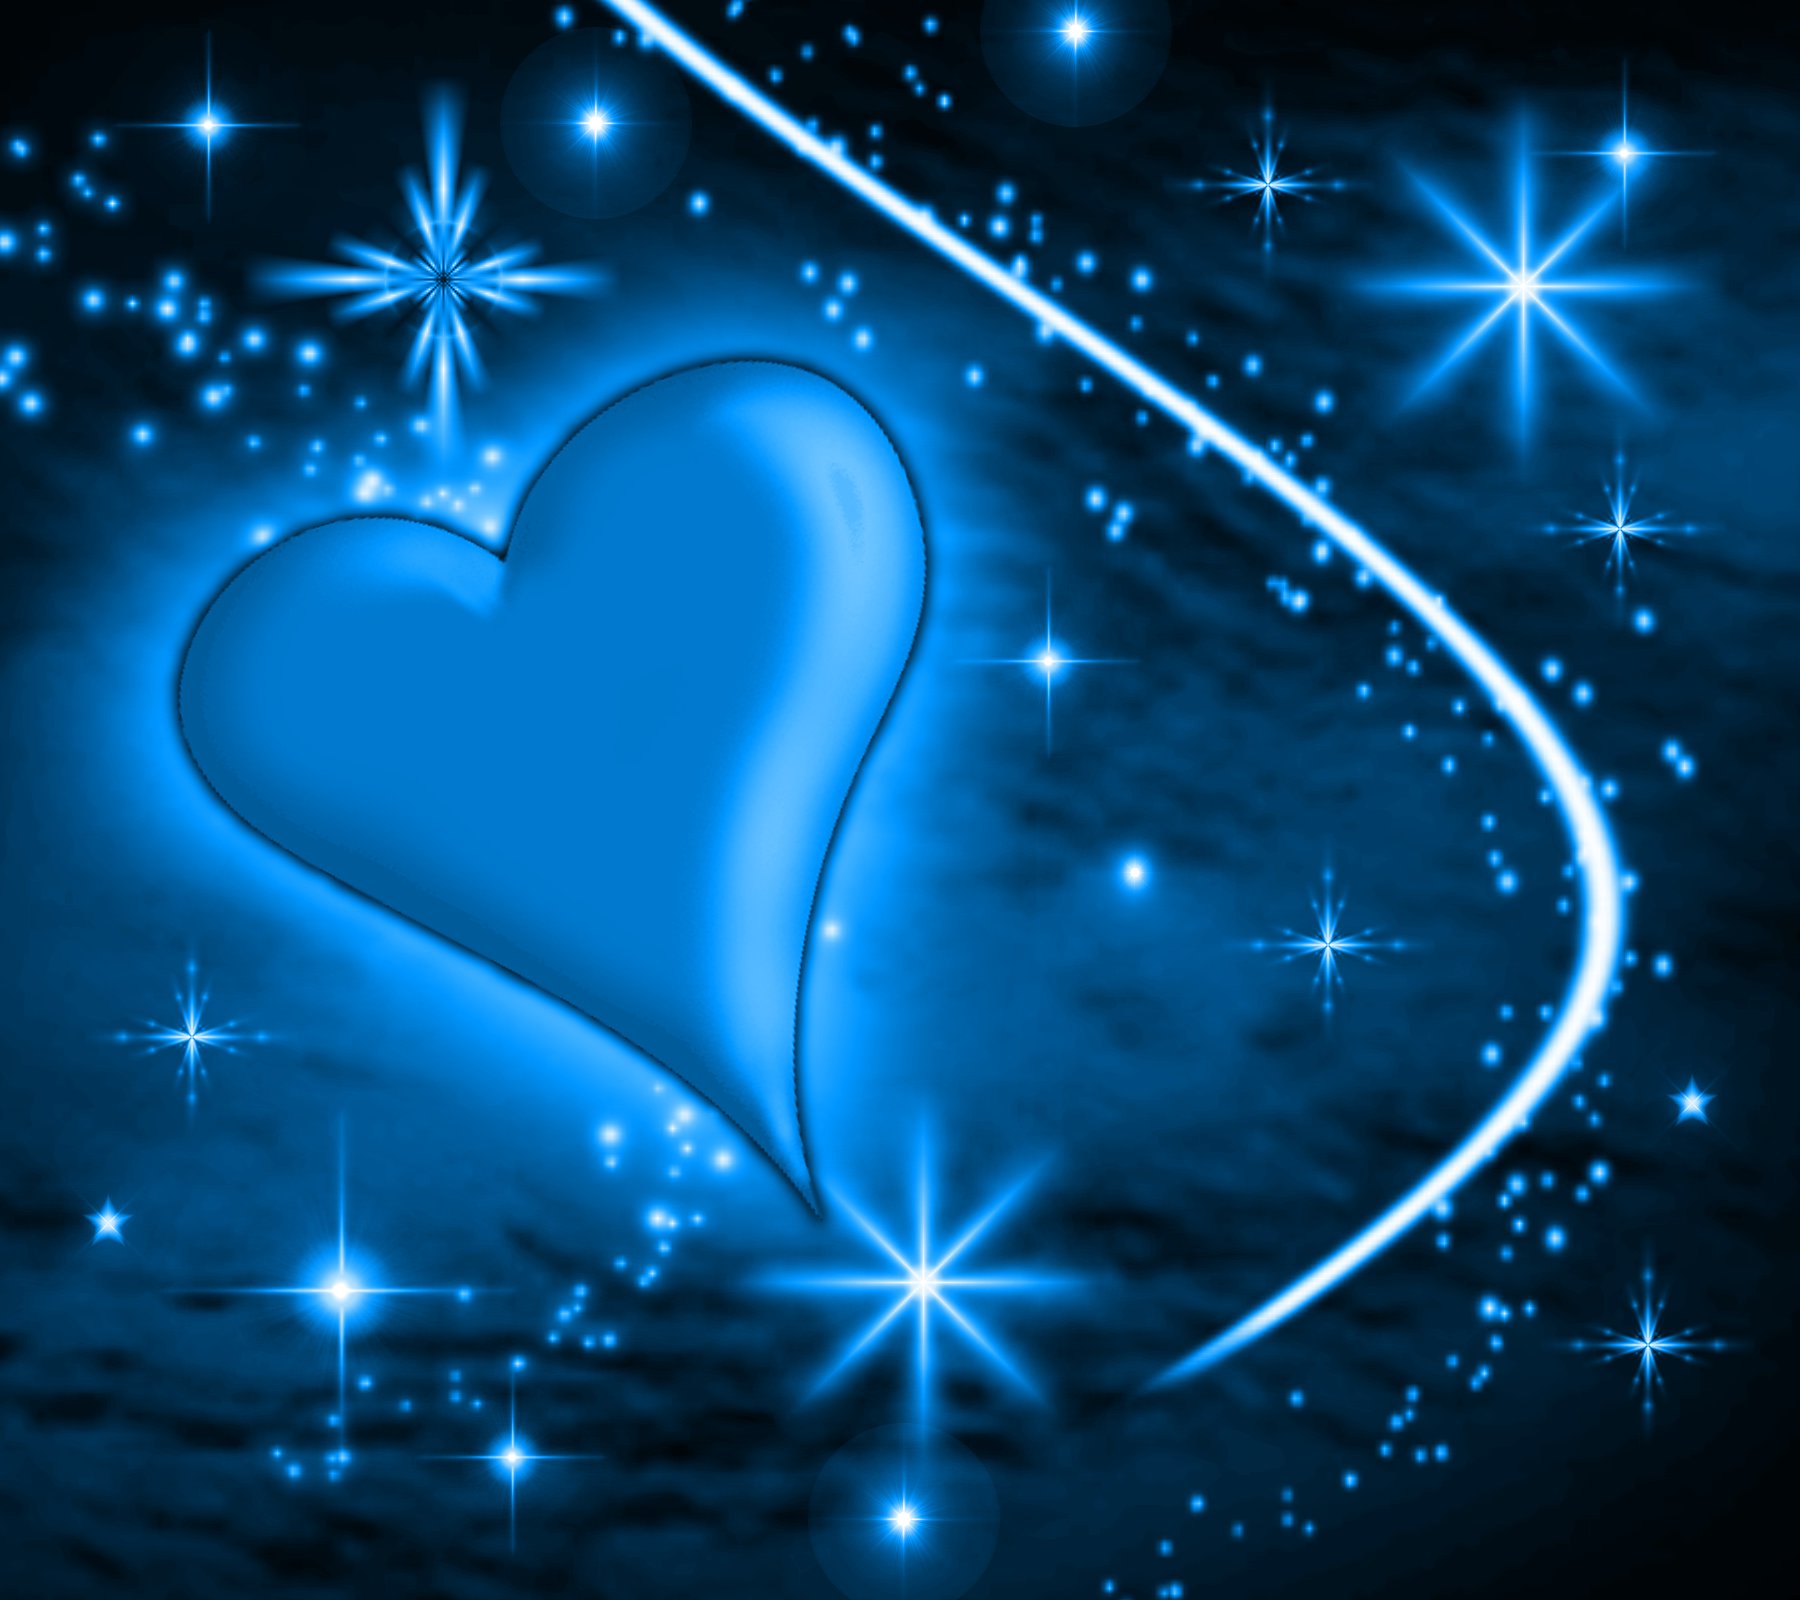 Blue Hearts Background Wallpaper Image Amp Pictures Becuo